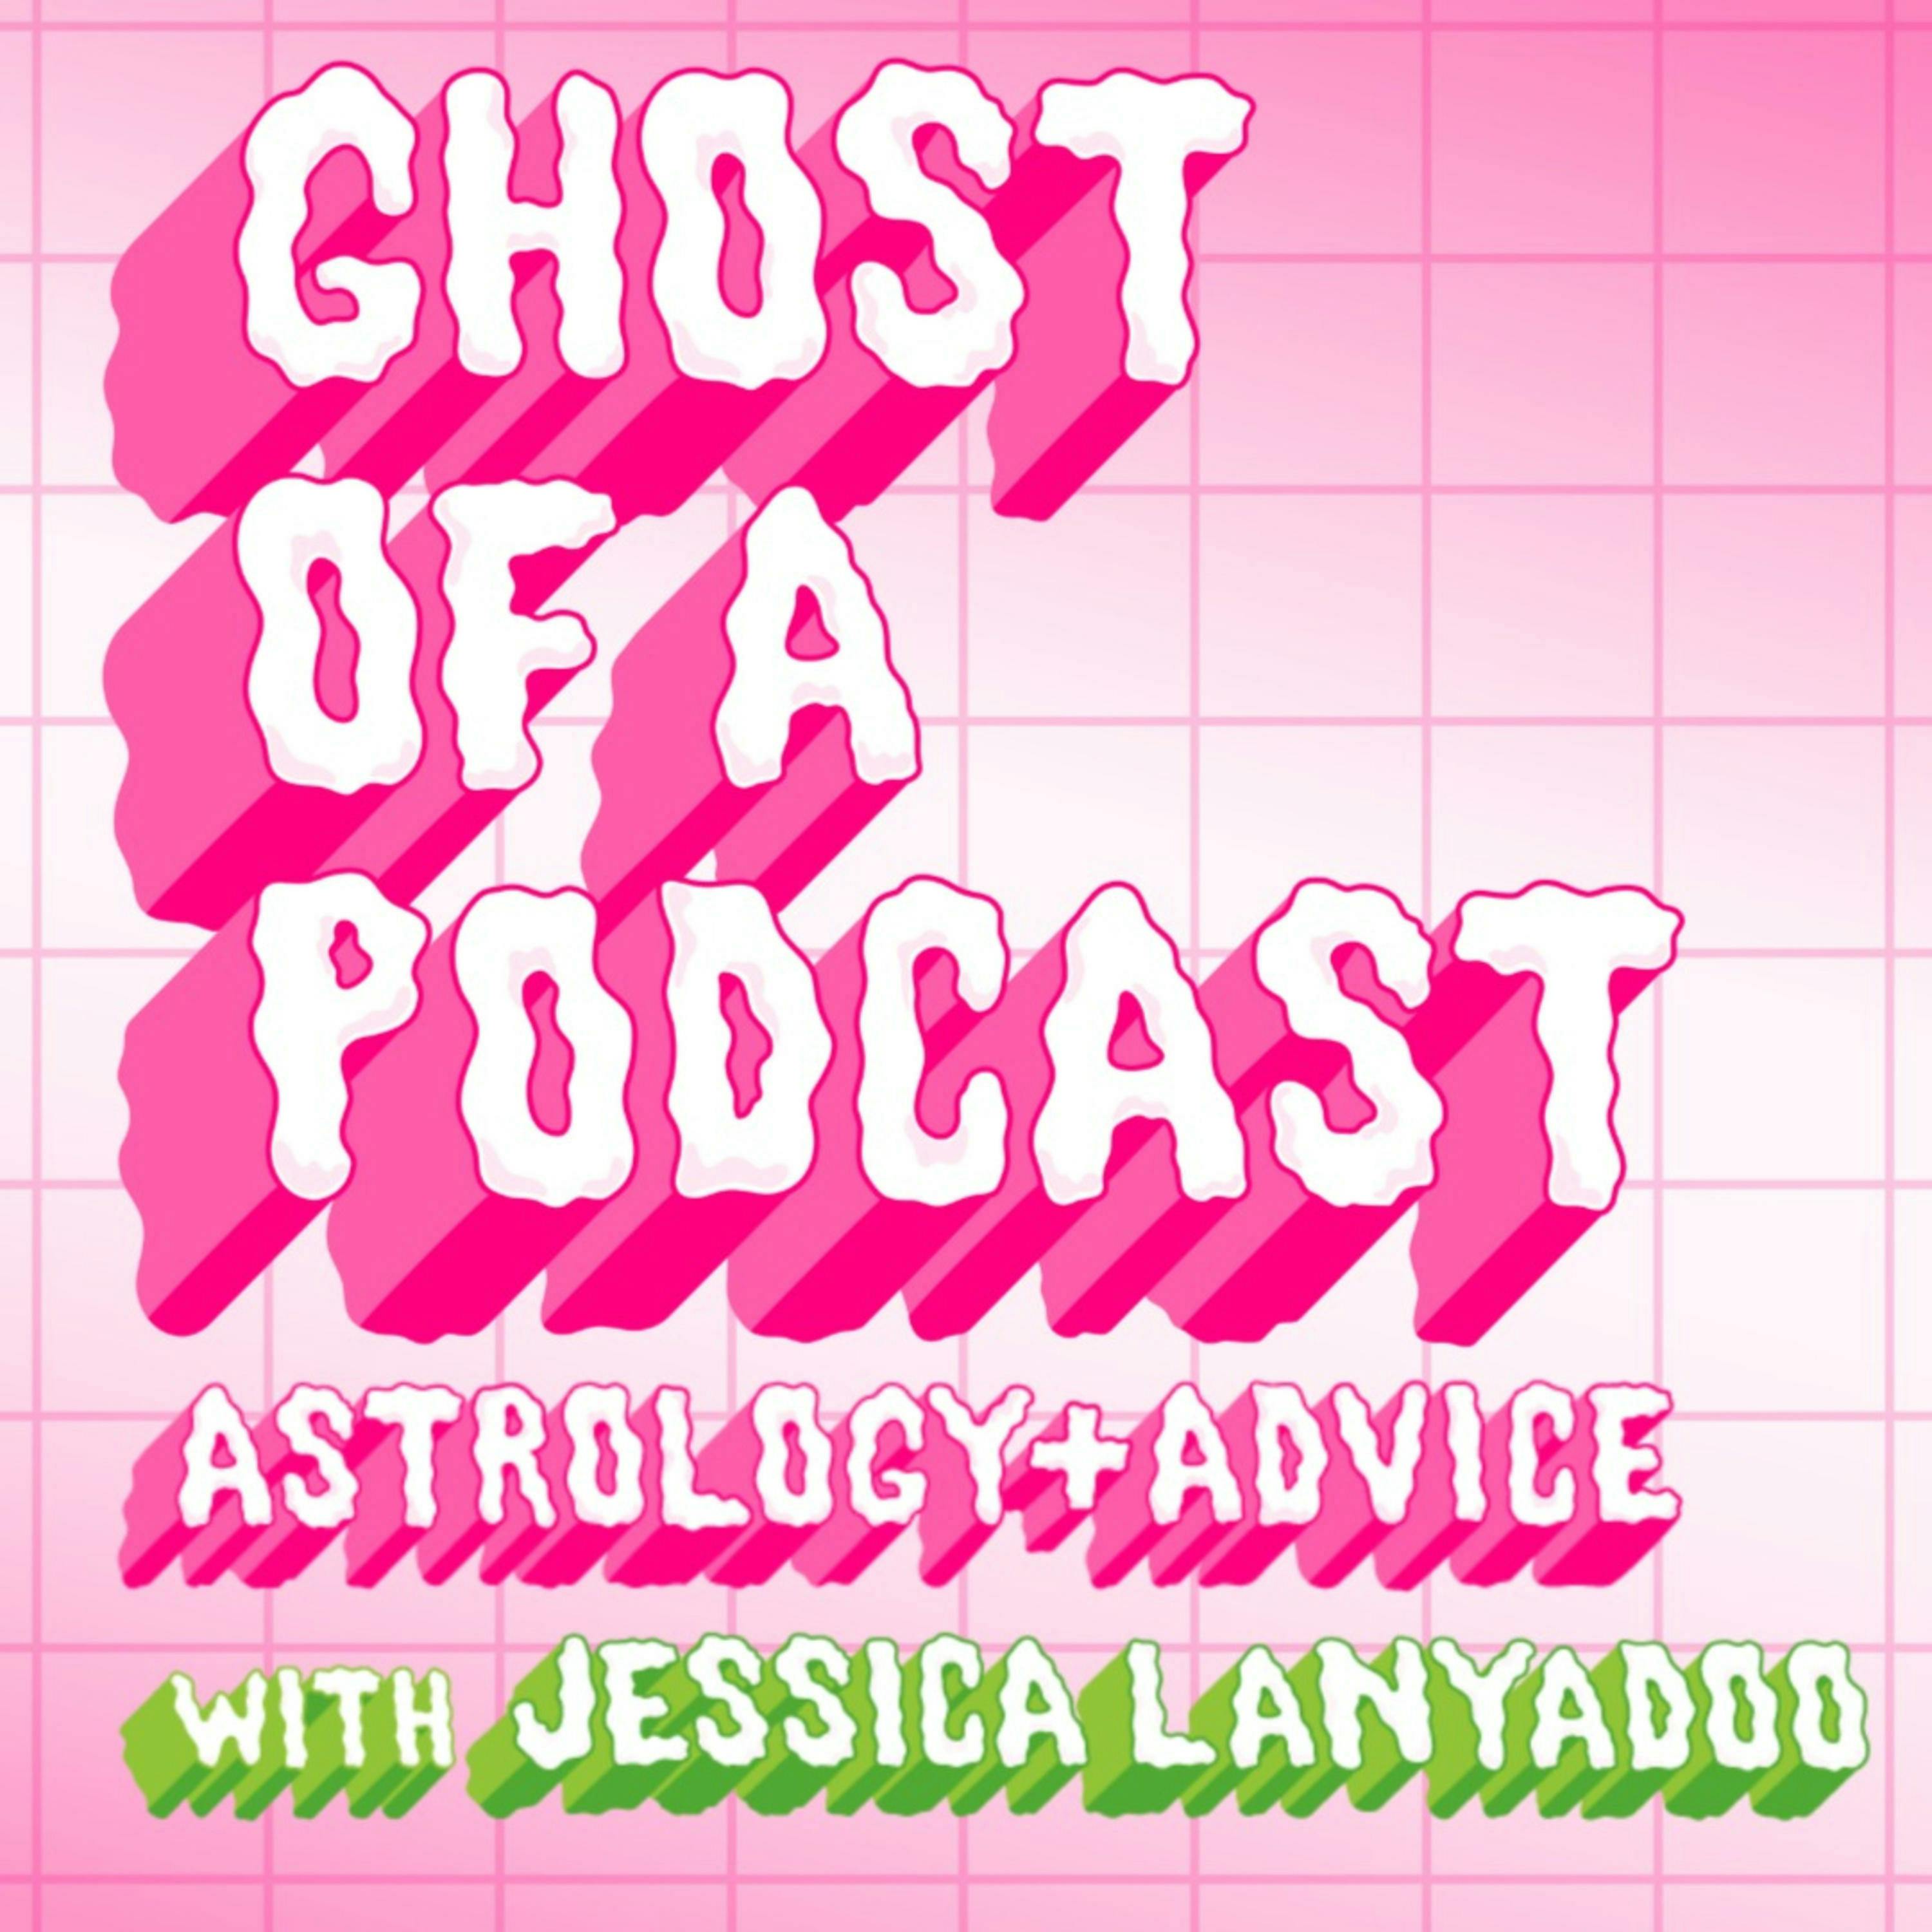 187: Stay or Go + Astrology